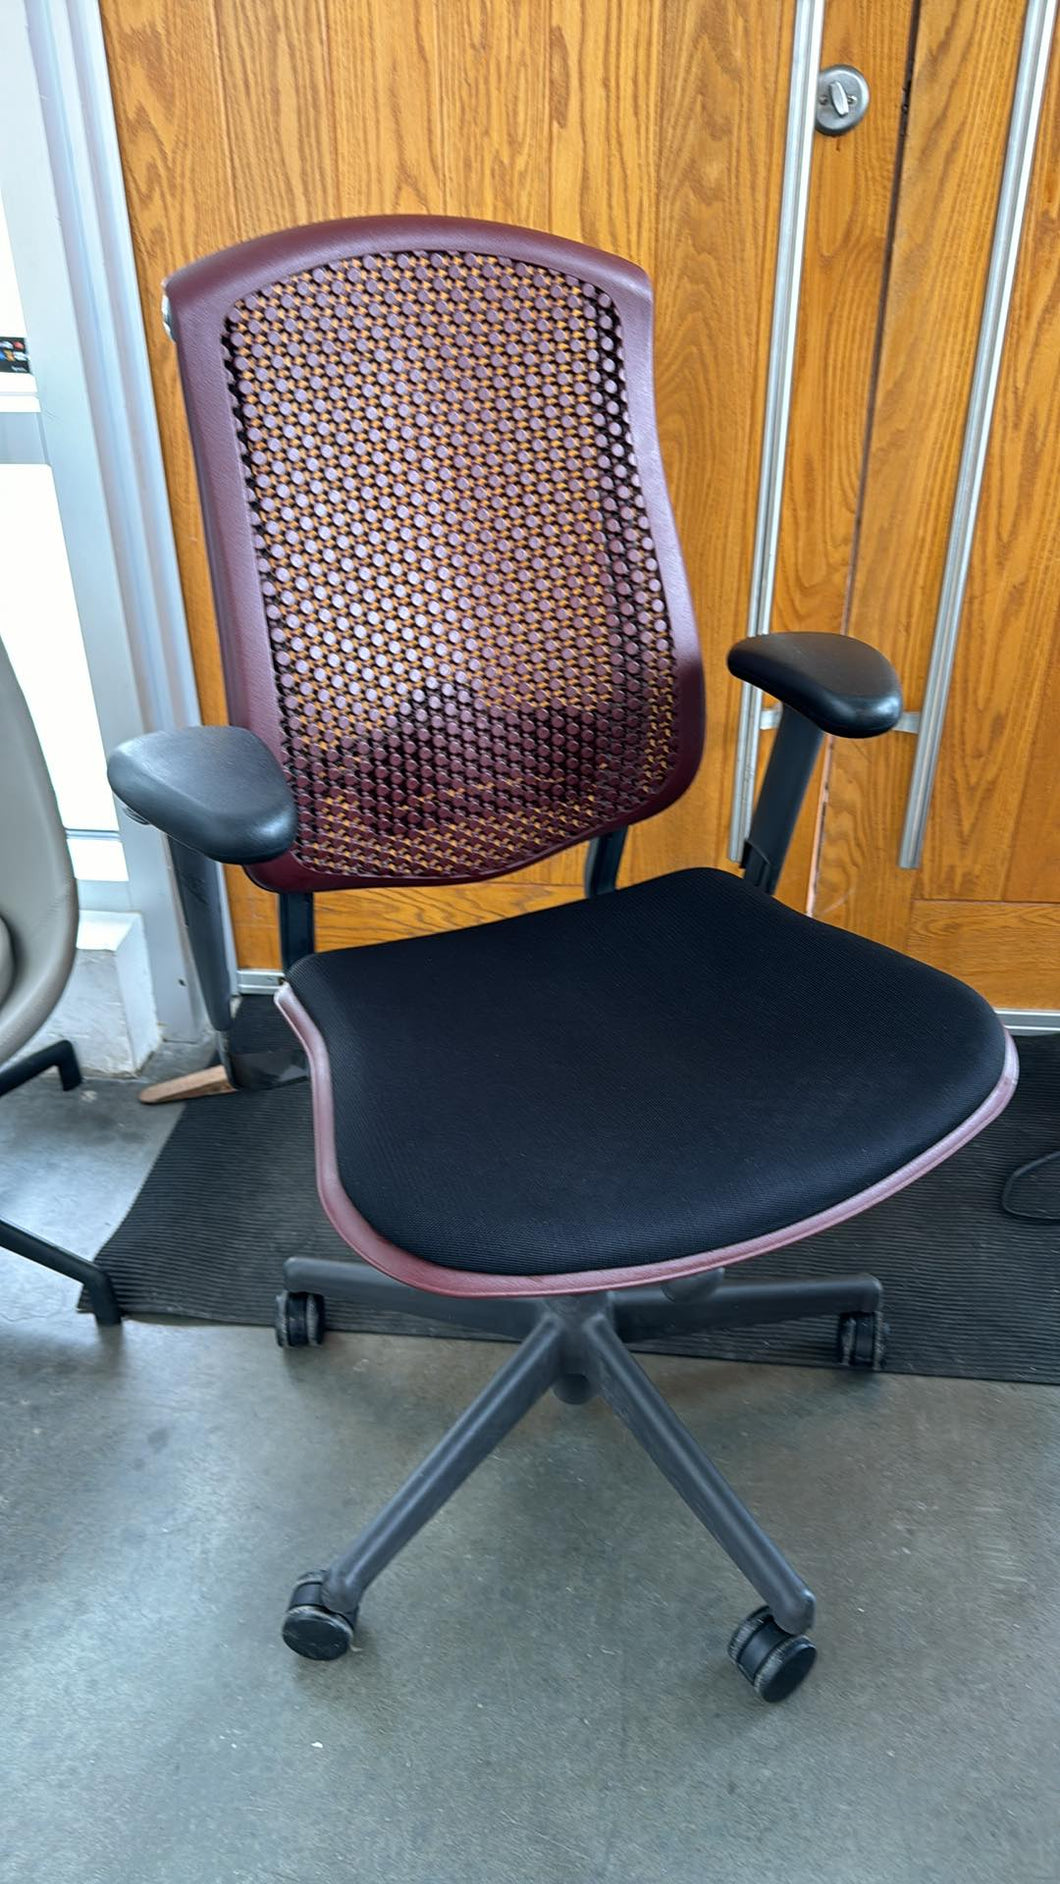 Used Herman Miller Celle Chair. Fully Loaded